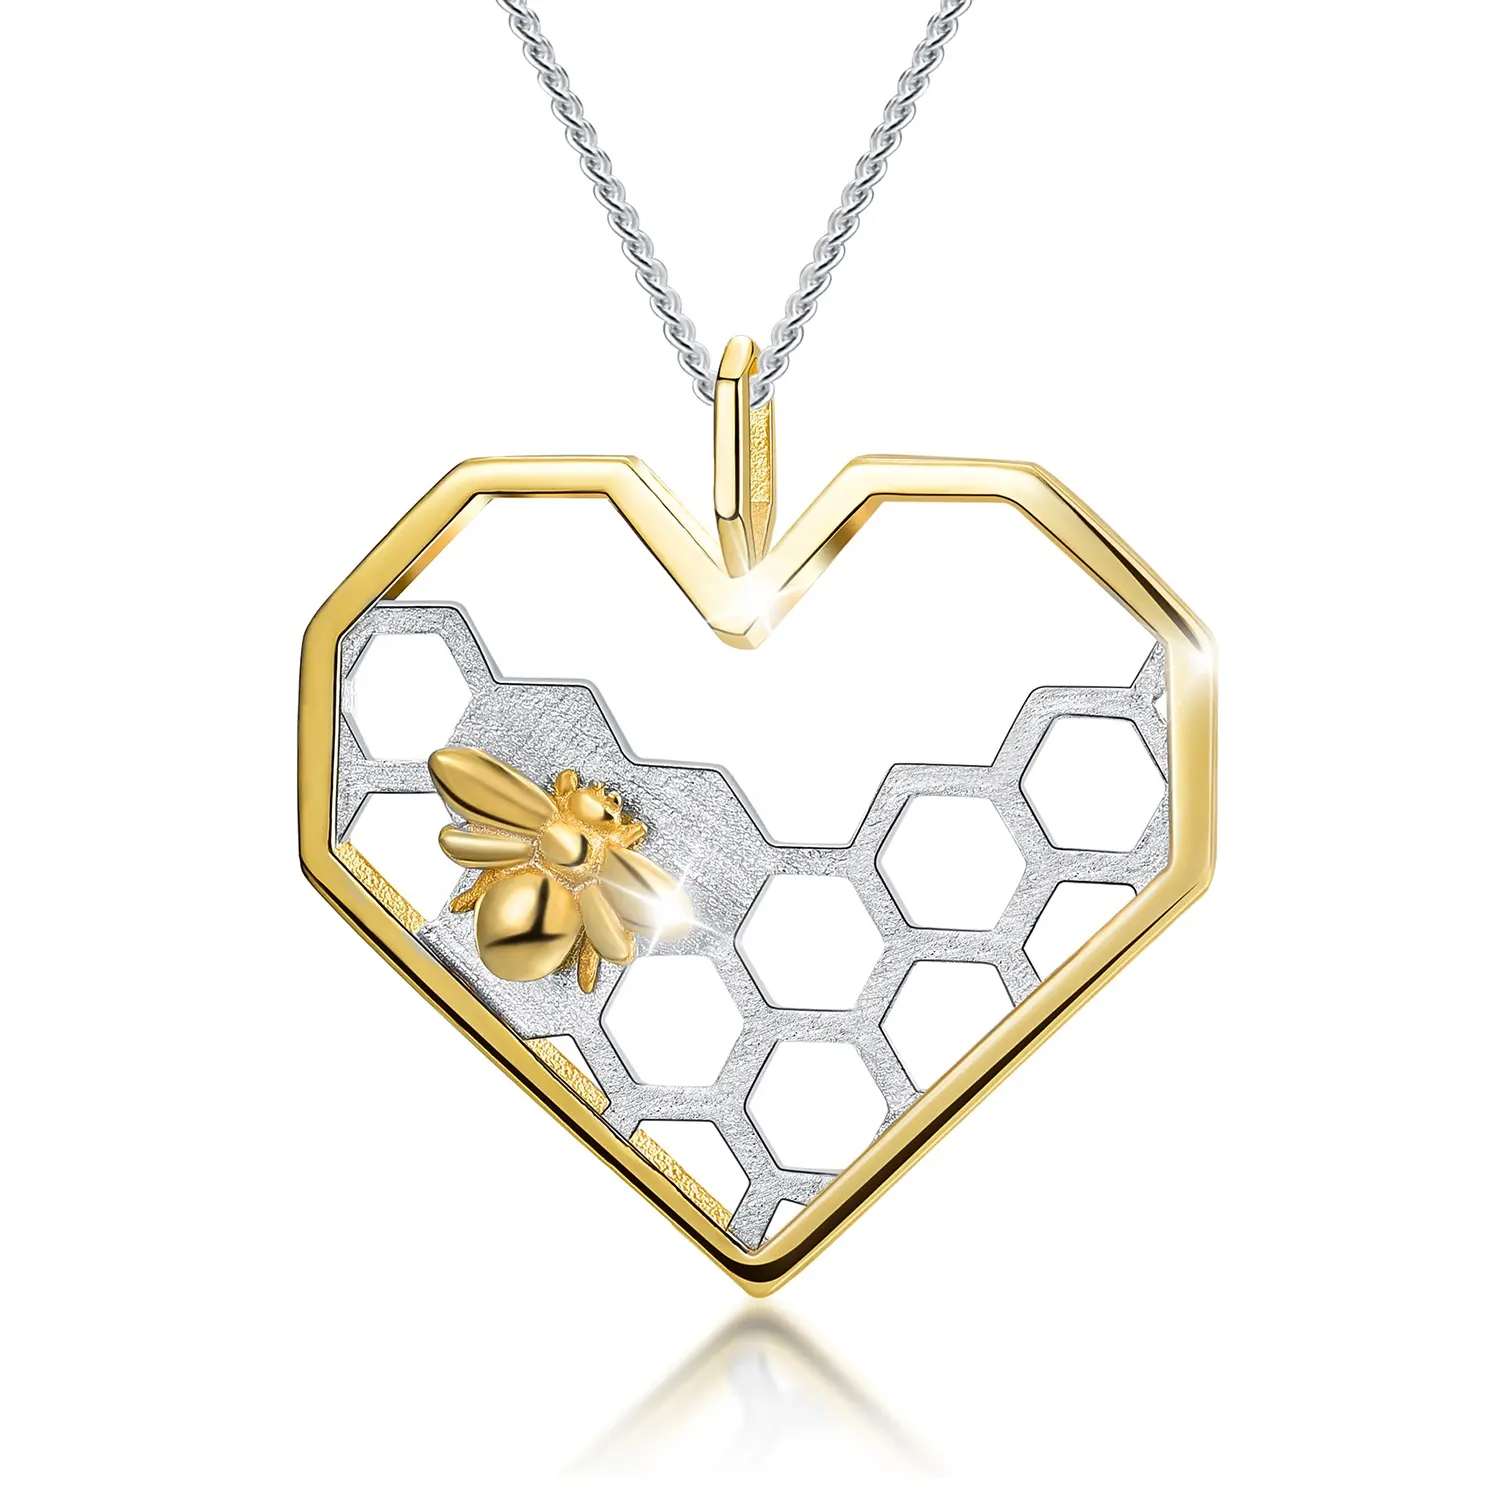 Fashion Jewelry Real 925 Sterling Silver Cute Little Bees Heart Shape 18 K Gold Pendant For Women Best Gift